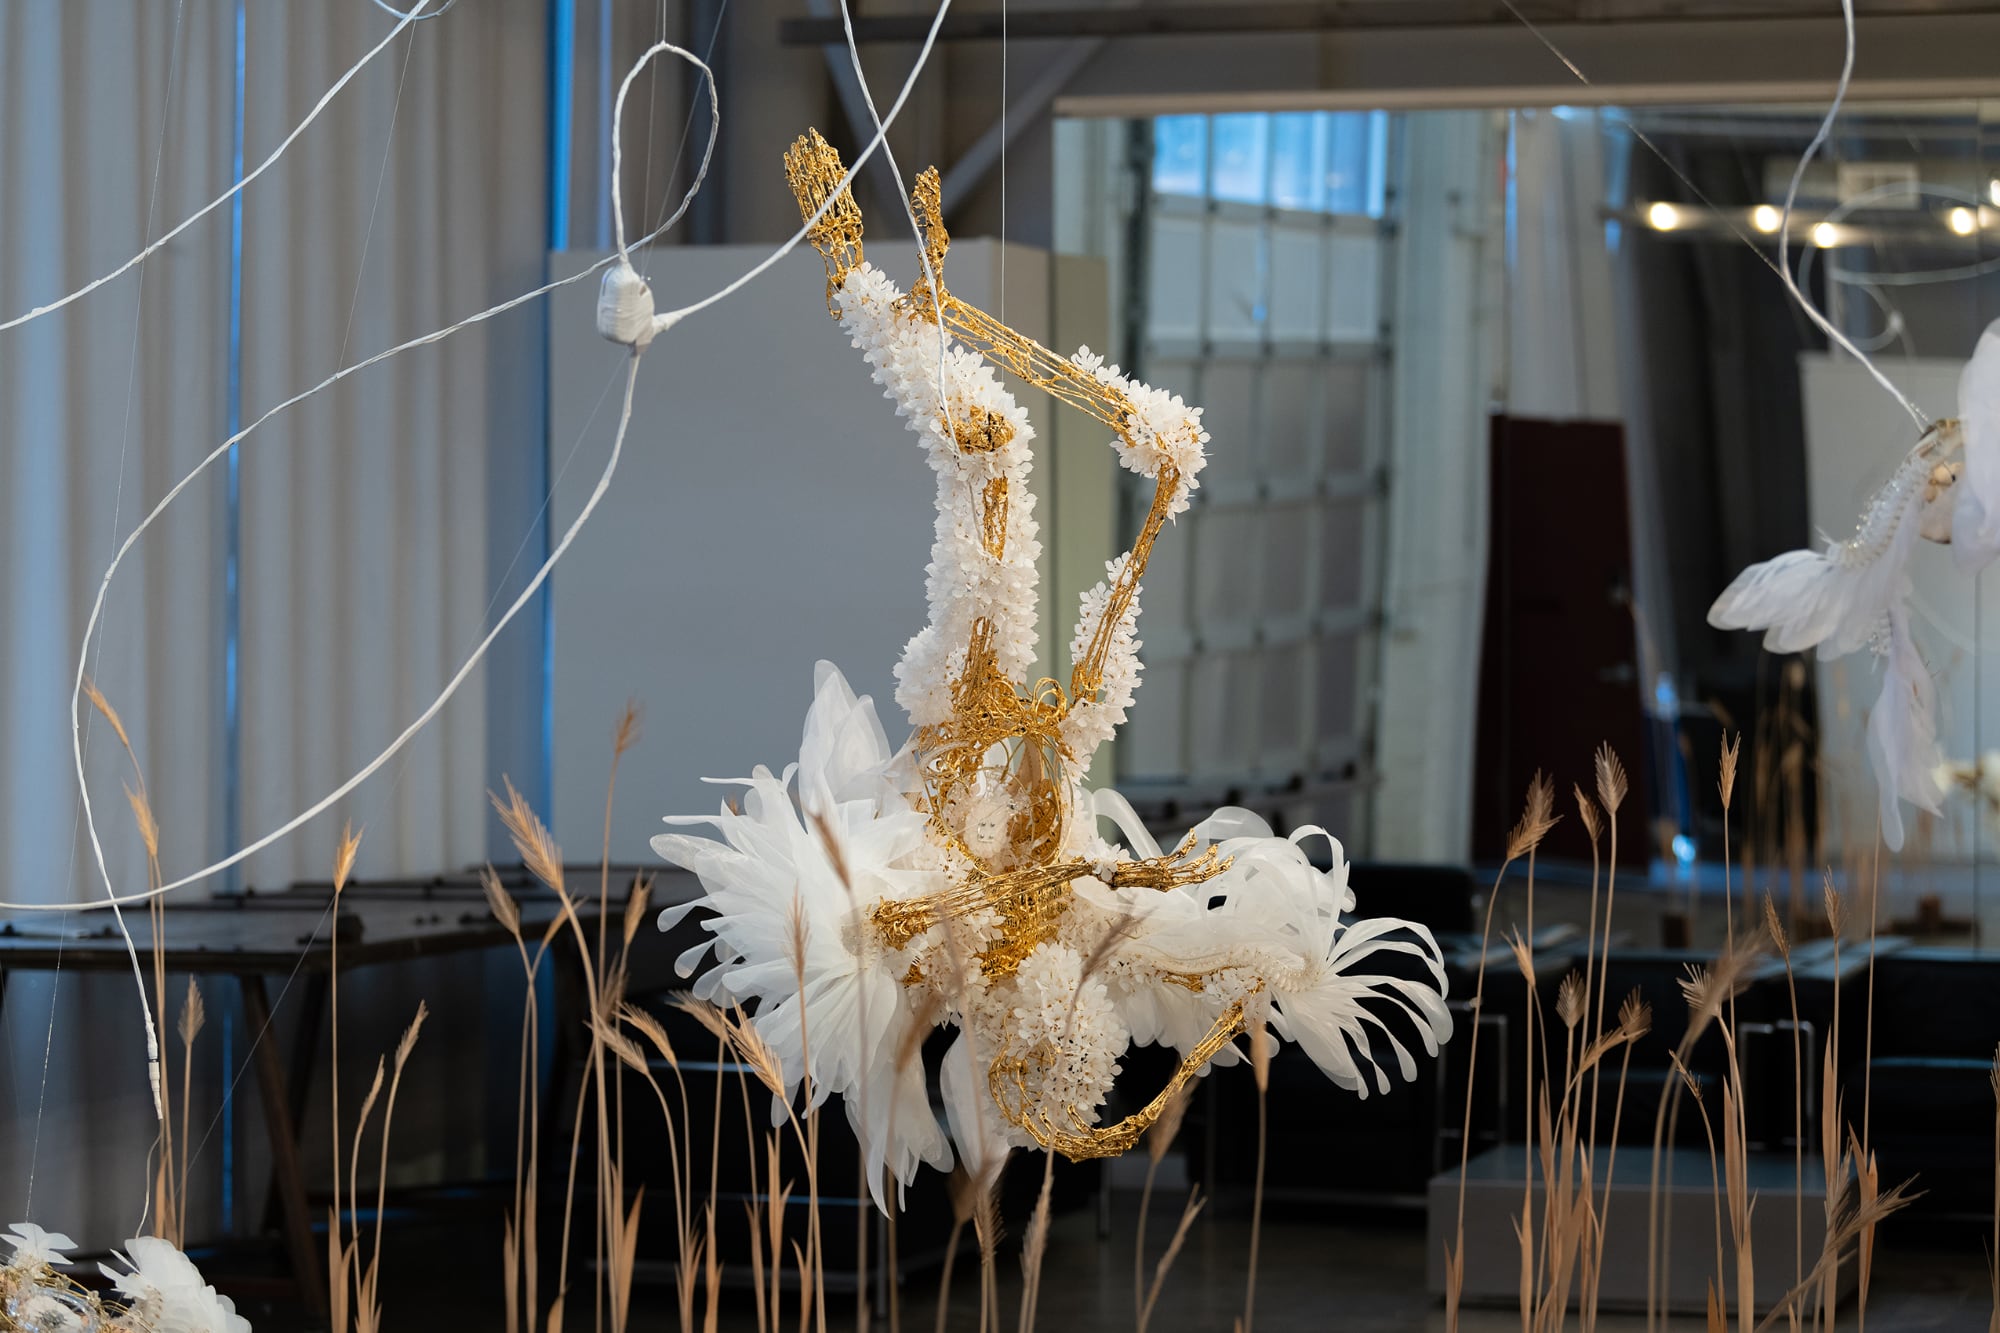 a figurative sculpture with a gold skeleton and white fluttery wings hangs upside down in a gallery with wheat on the floor